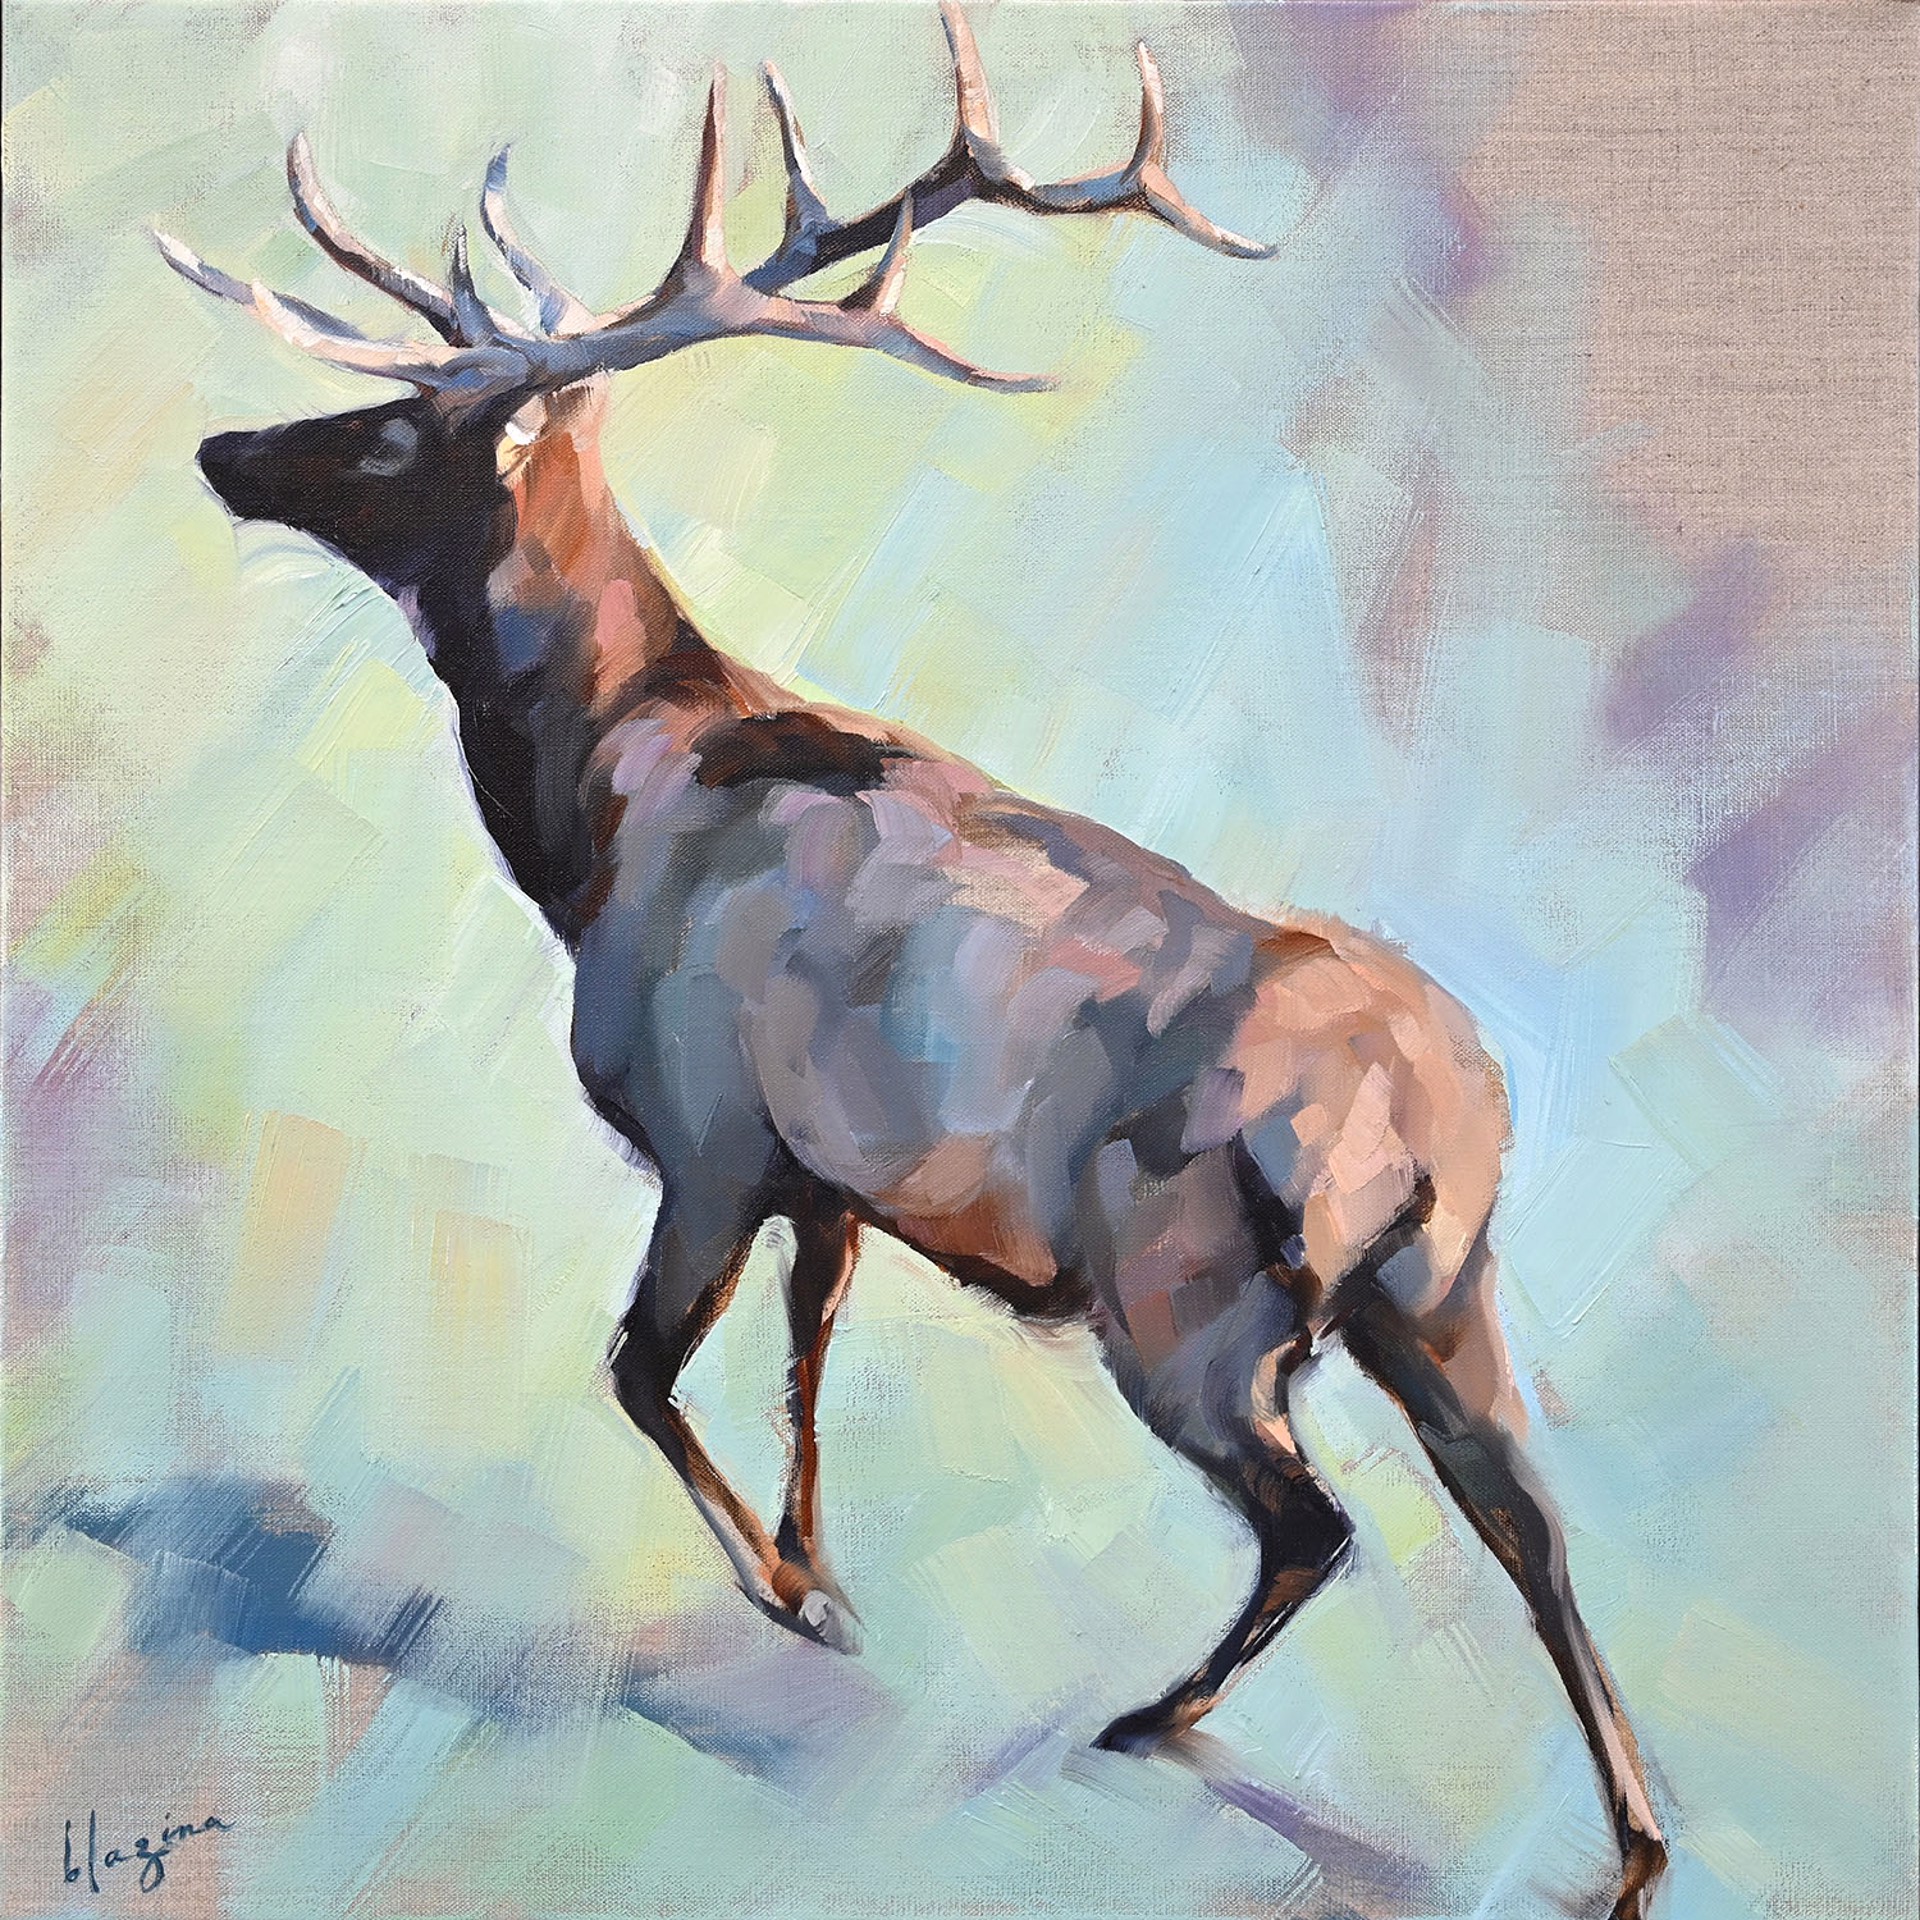 Original Oil Painting Featuring A Stag Elk Over Abstract Turquoise Background